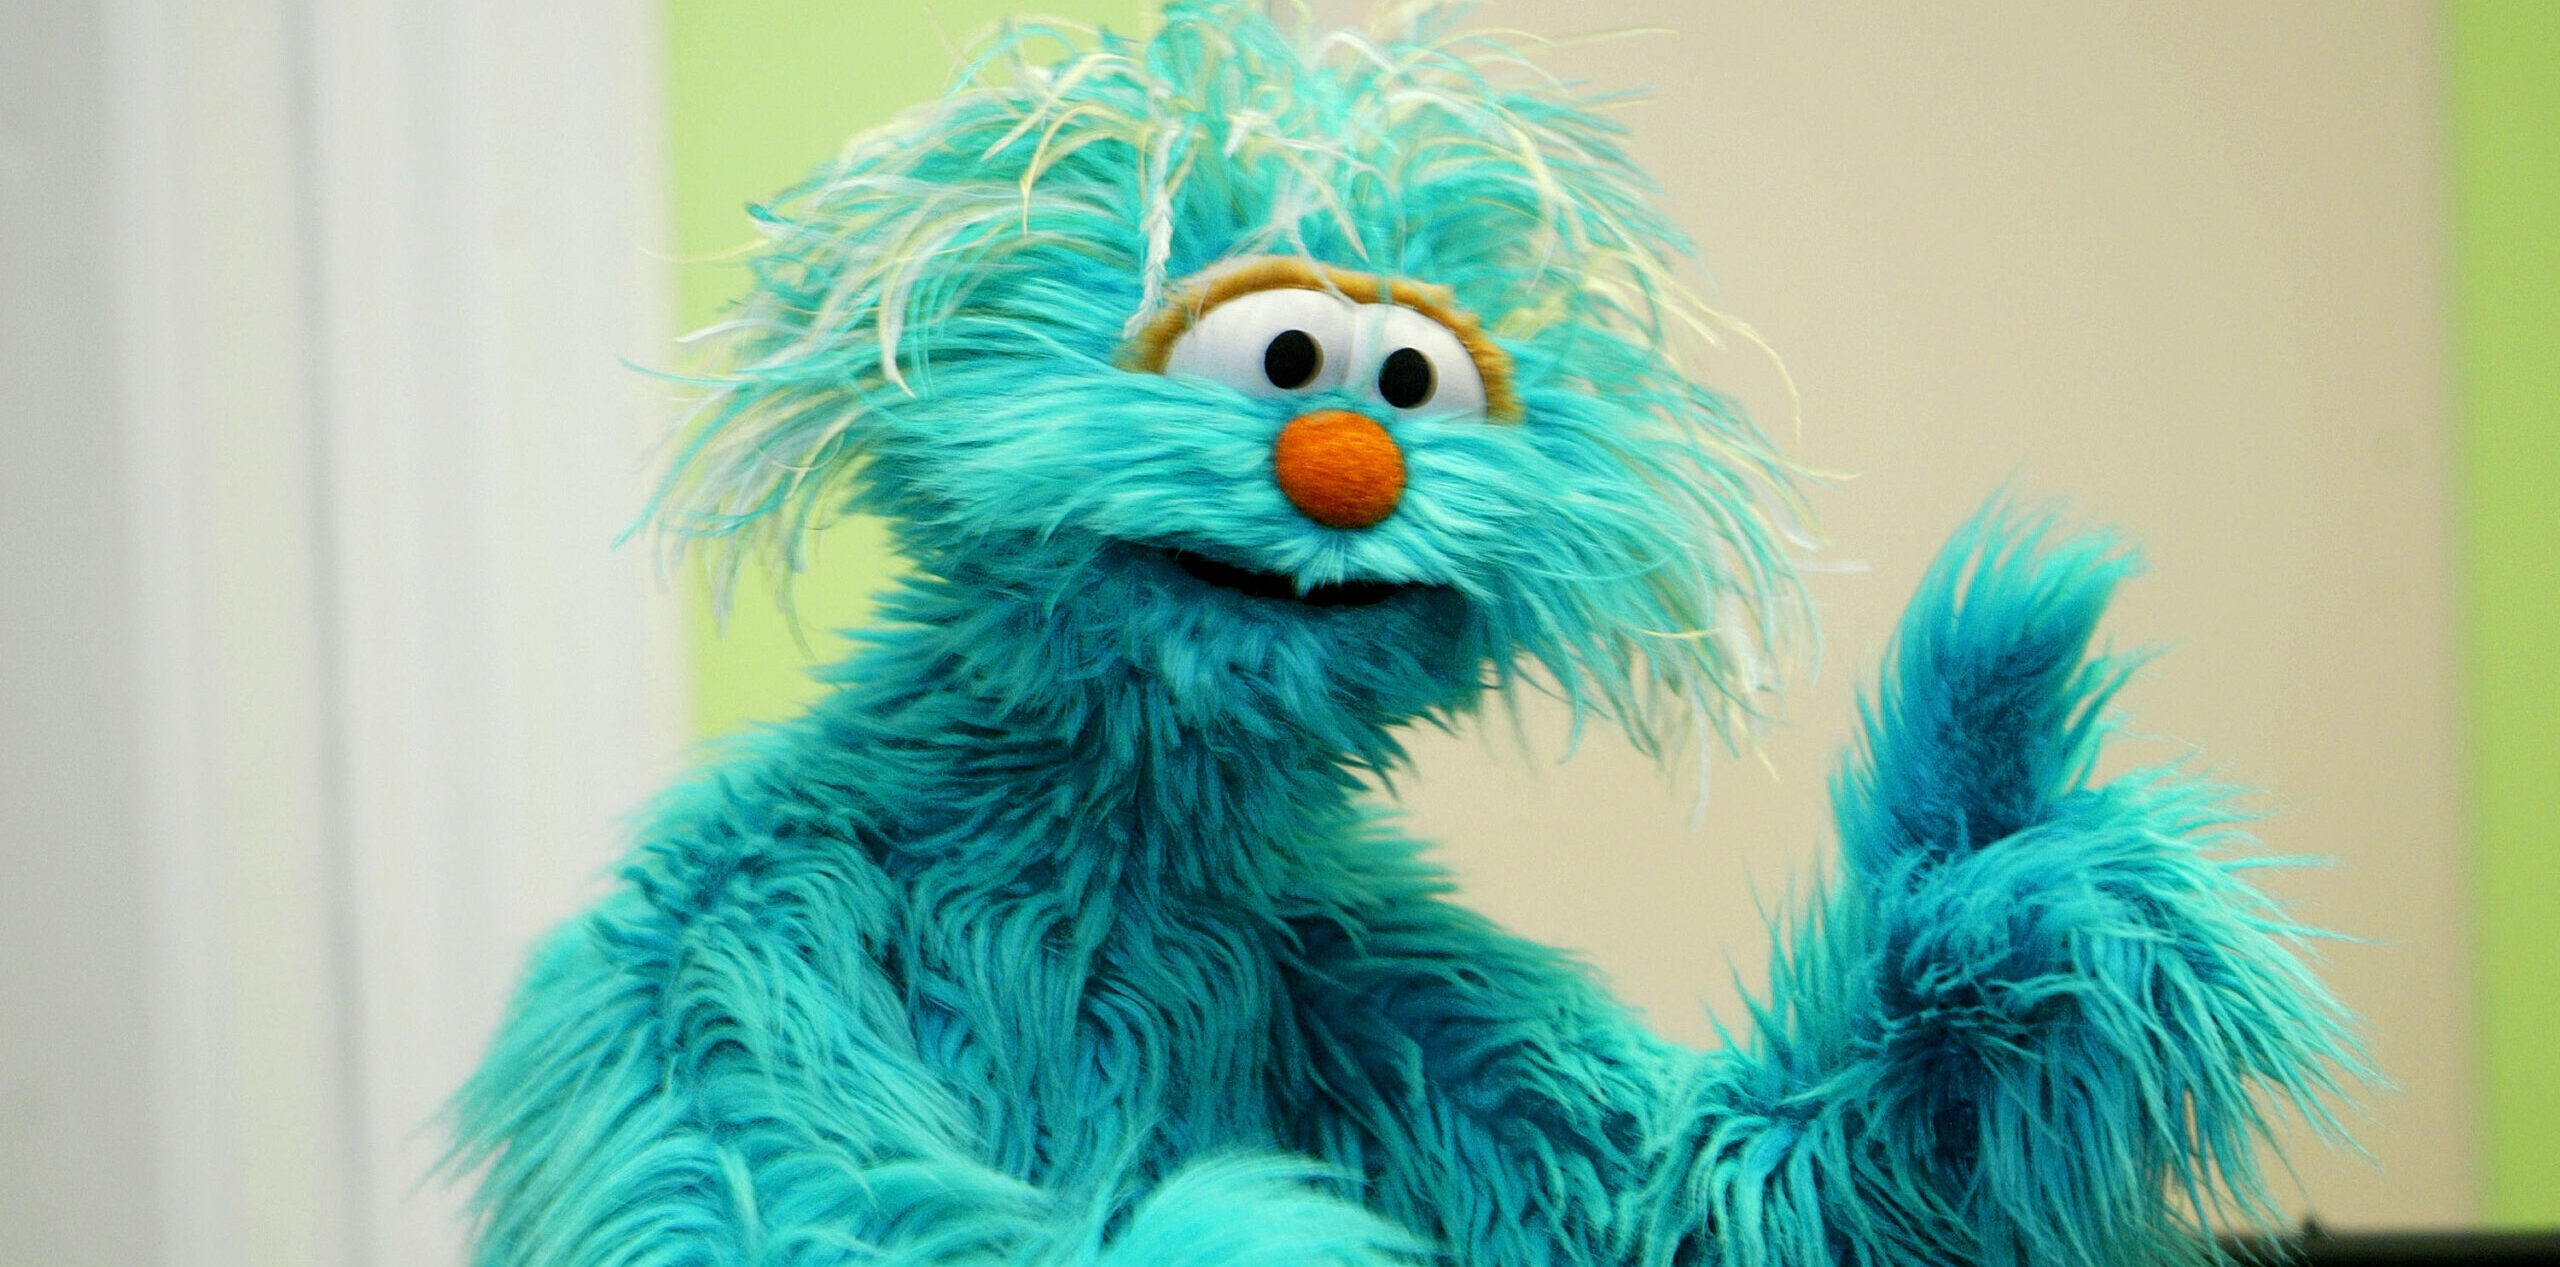 Sesame Place Issues An Apology After Two Black Girls Were Passed Over During A Parade